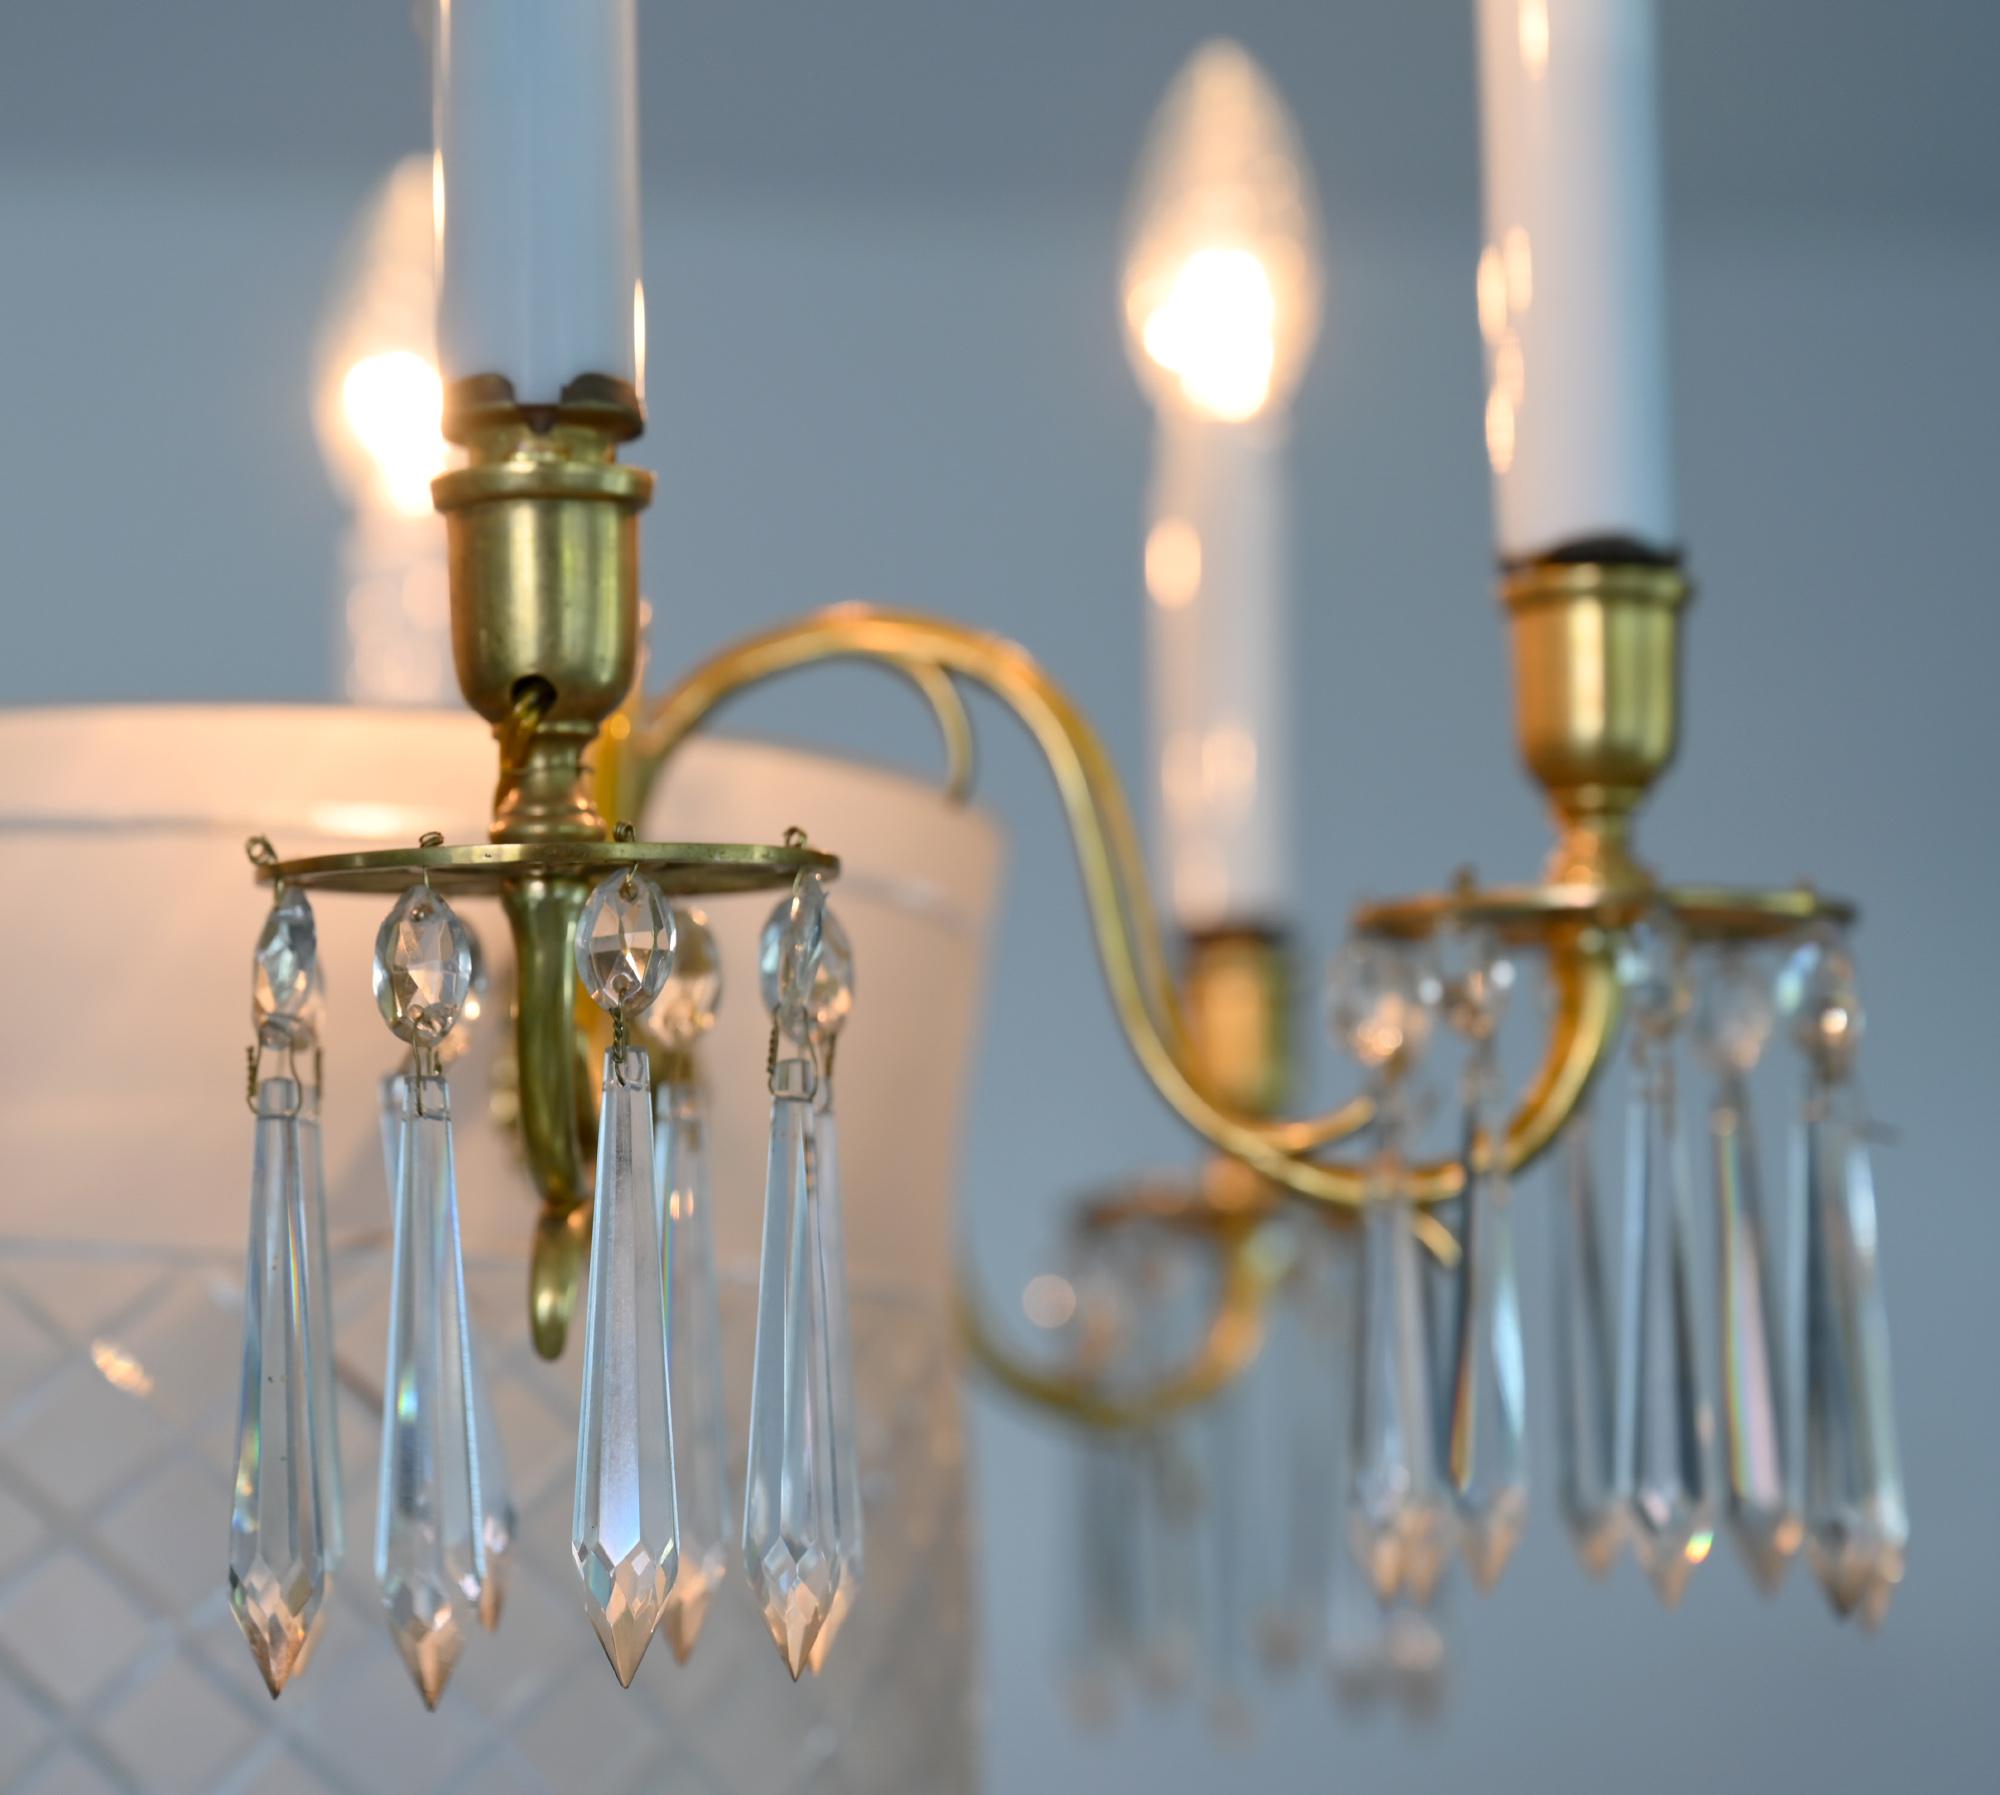 Gilt 19th Century Chandelier Sweden or Baltic States Cut Glas Gilded For Sale